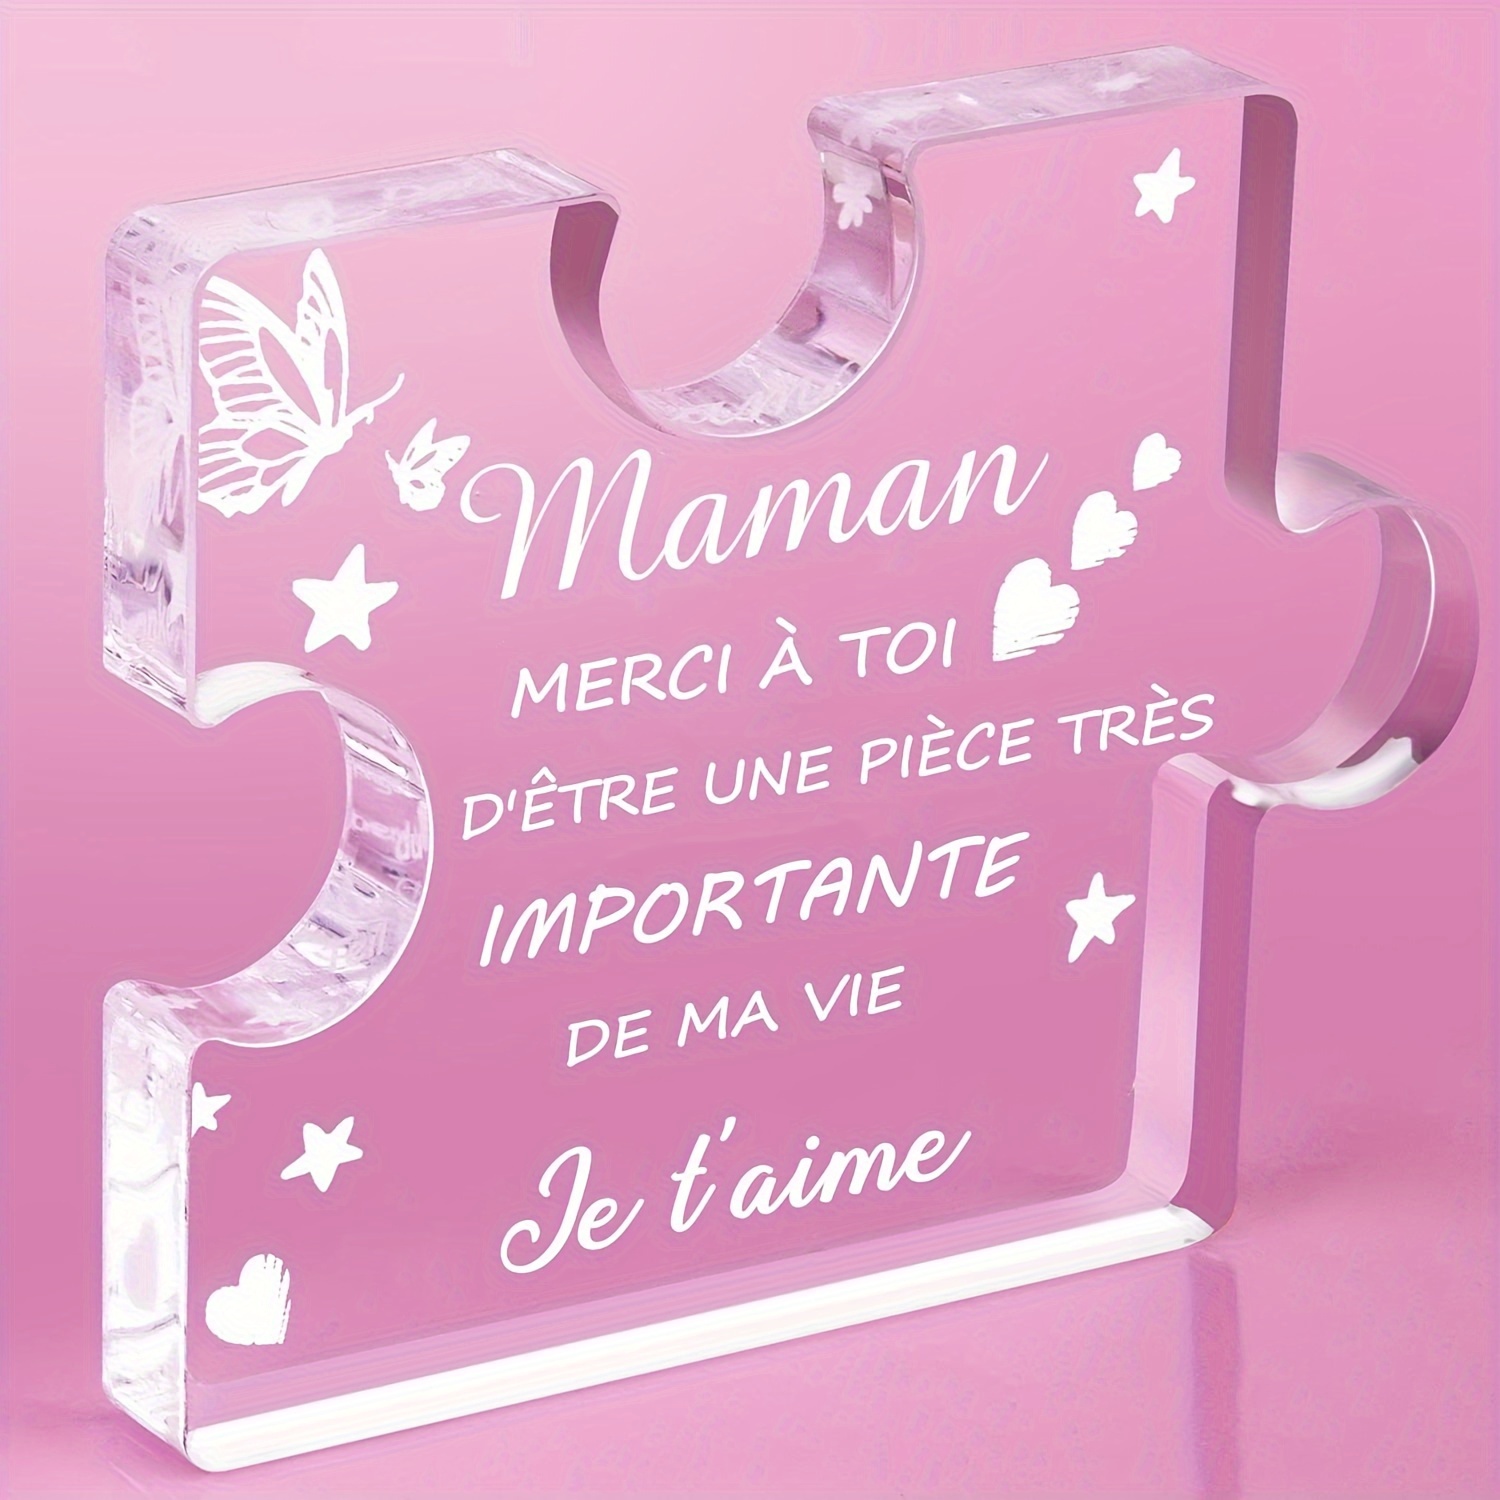 

1pc, Mom Gift, Mother's Day Gift, Acrylic Block Puzzle Engraving, Mom Birthday Gift, Wife Birthday Gift, Mom Christmas Gift, Women's Valentine's Day Gift, Paperweight Souvenir (french)